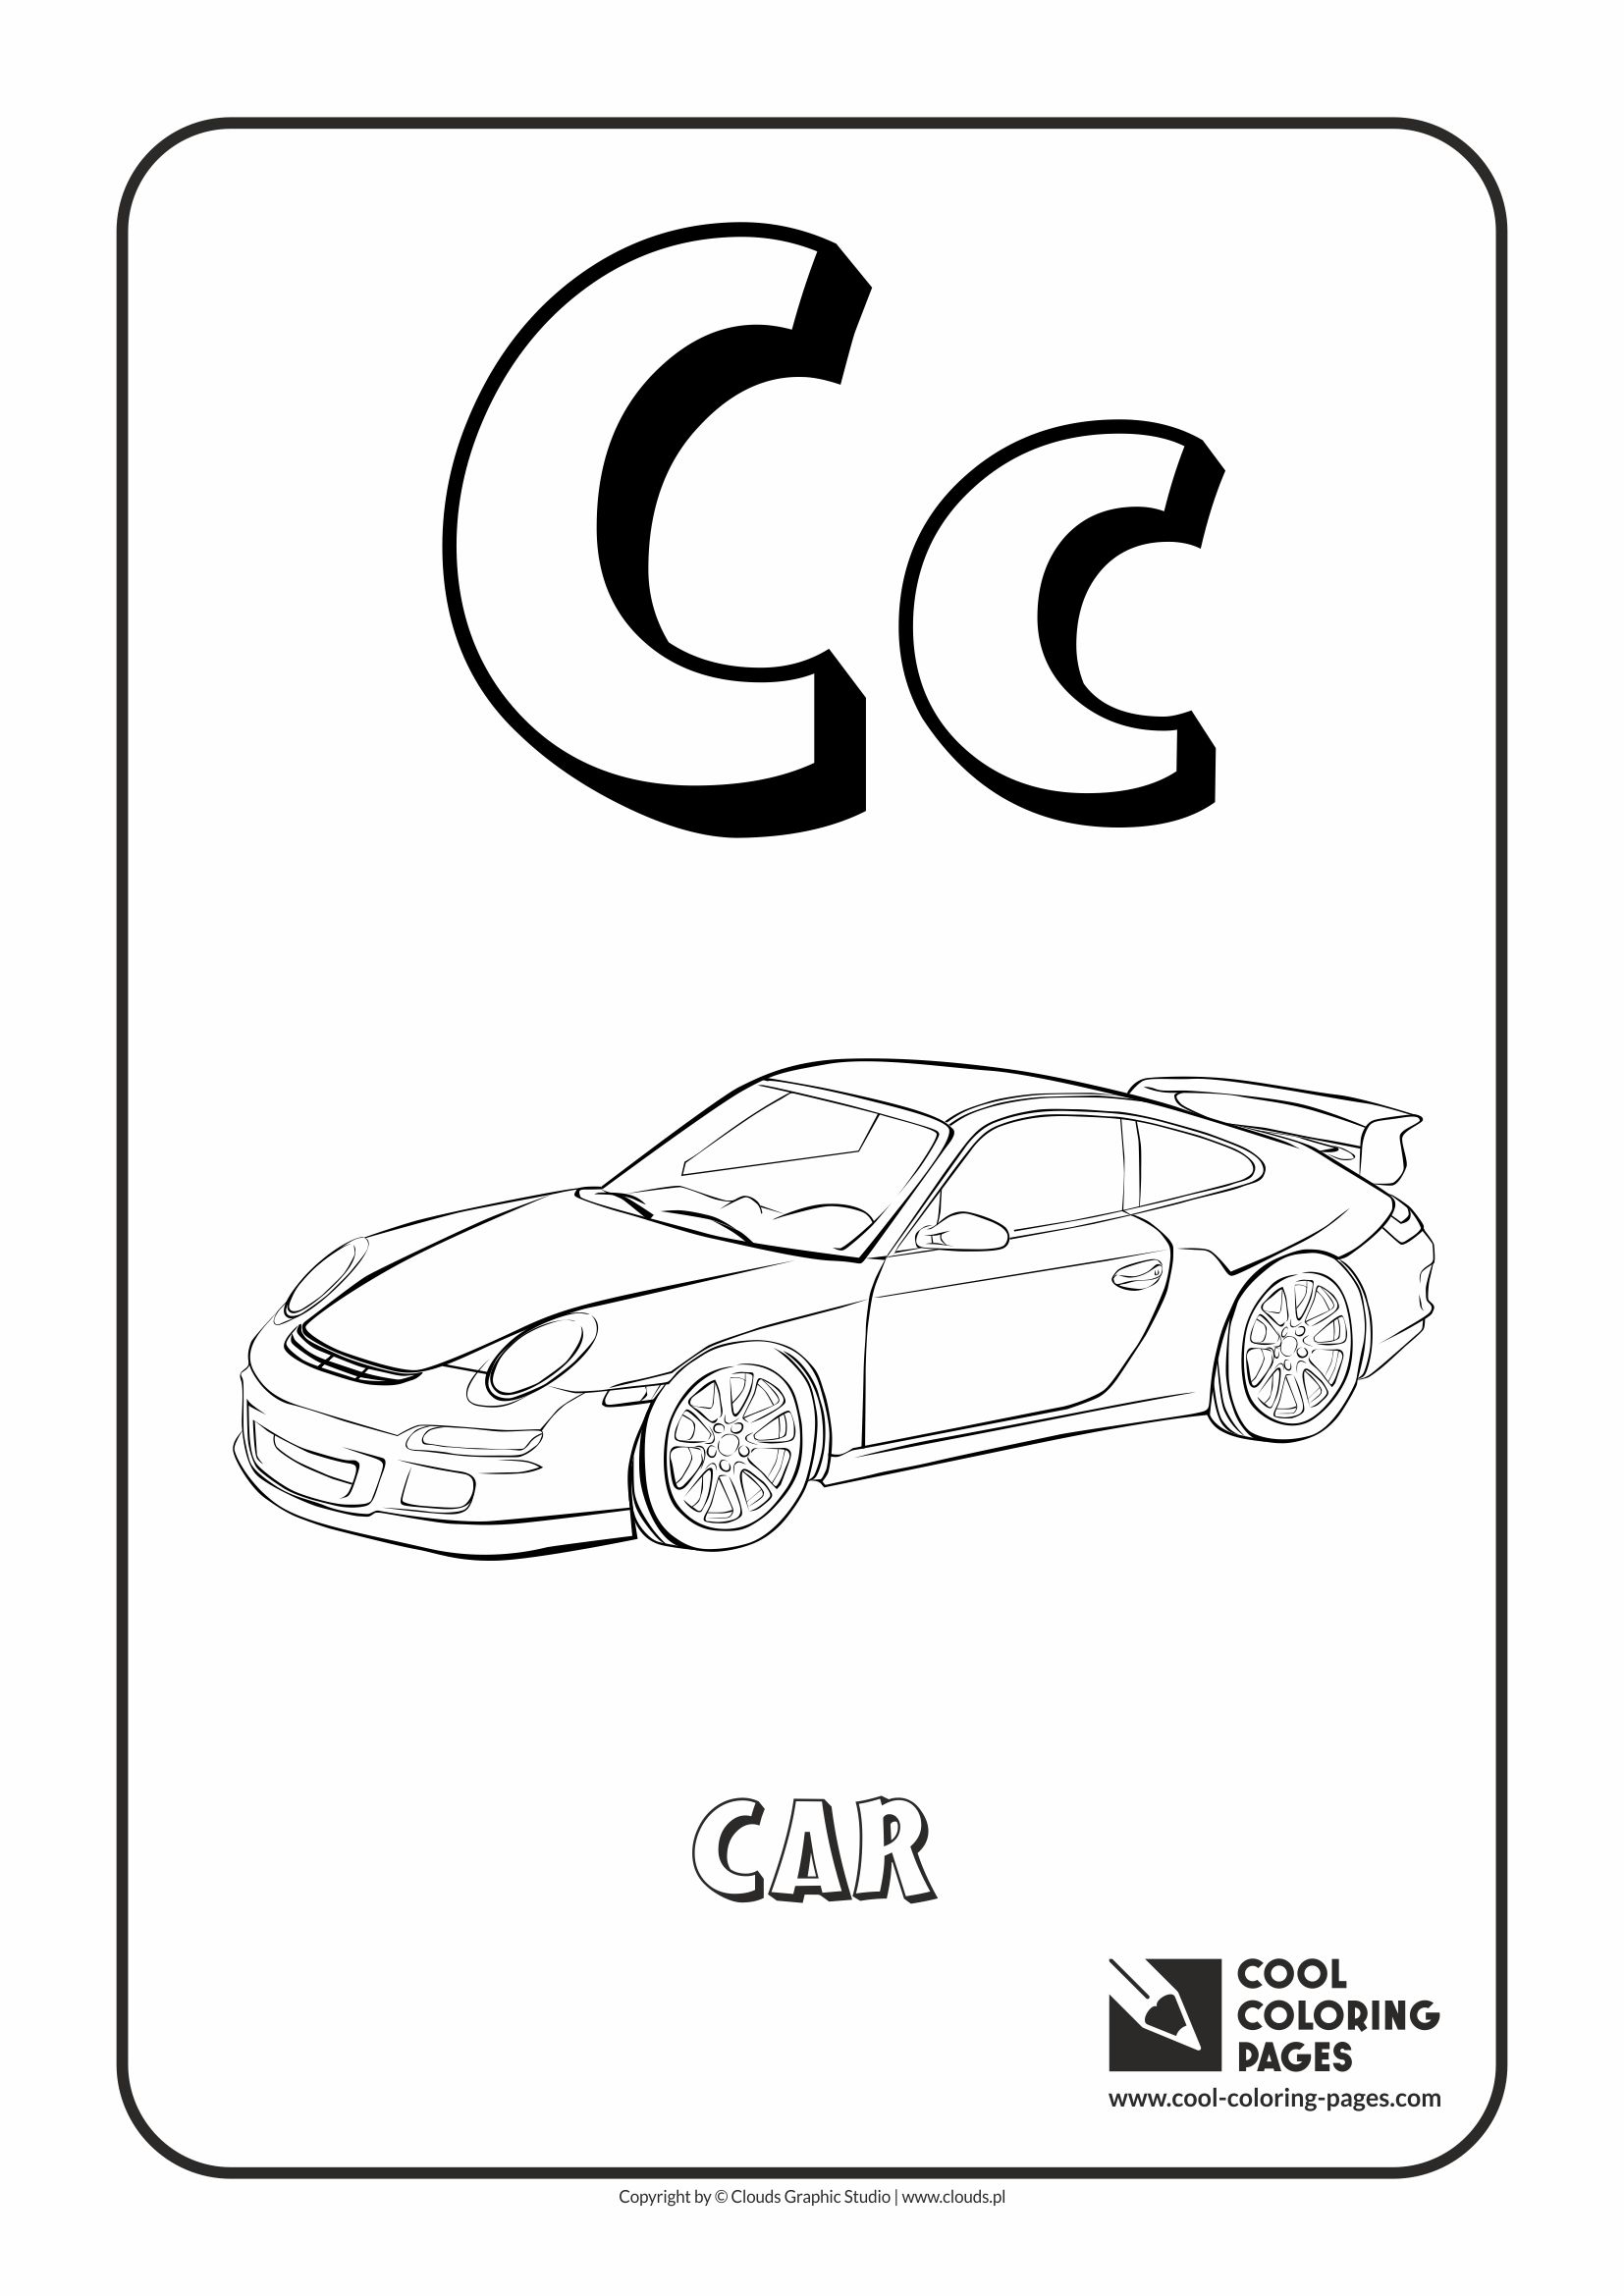 Cool Coloring Pages - Alphabet / Letter C / Coloring page with letter C